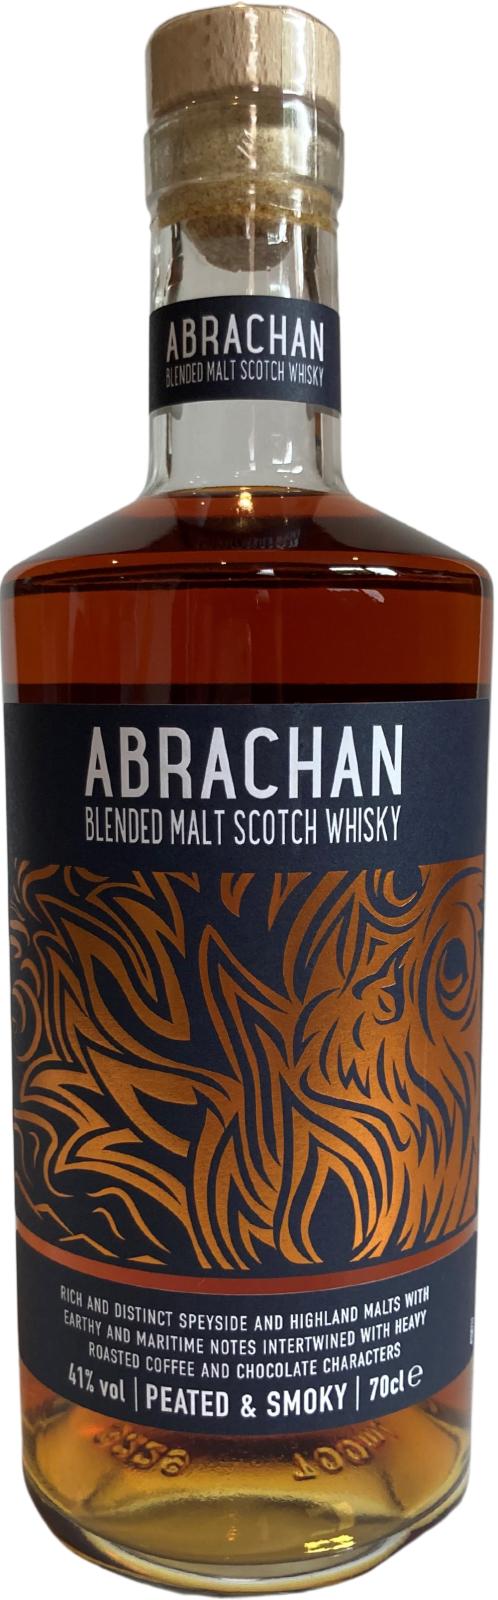 Abrachan Peated & Smoky Cd - Ratings and reviews - Whiskybase